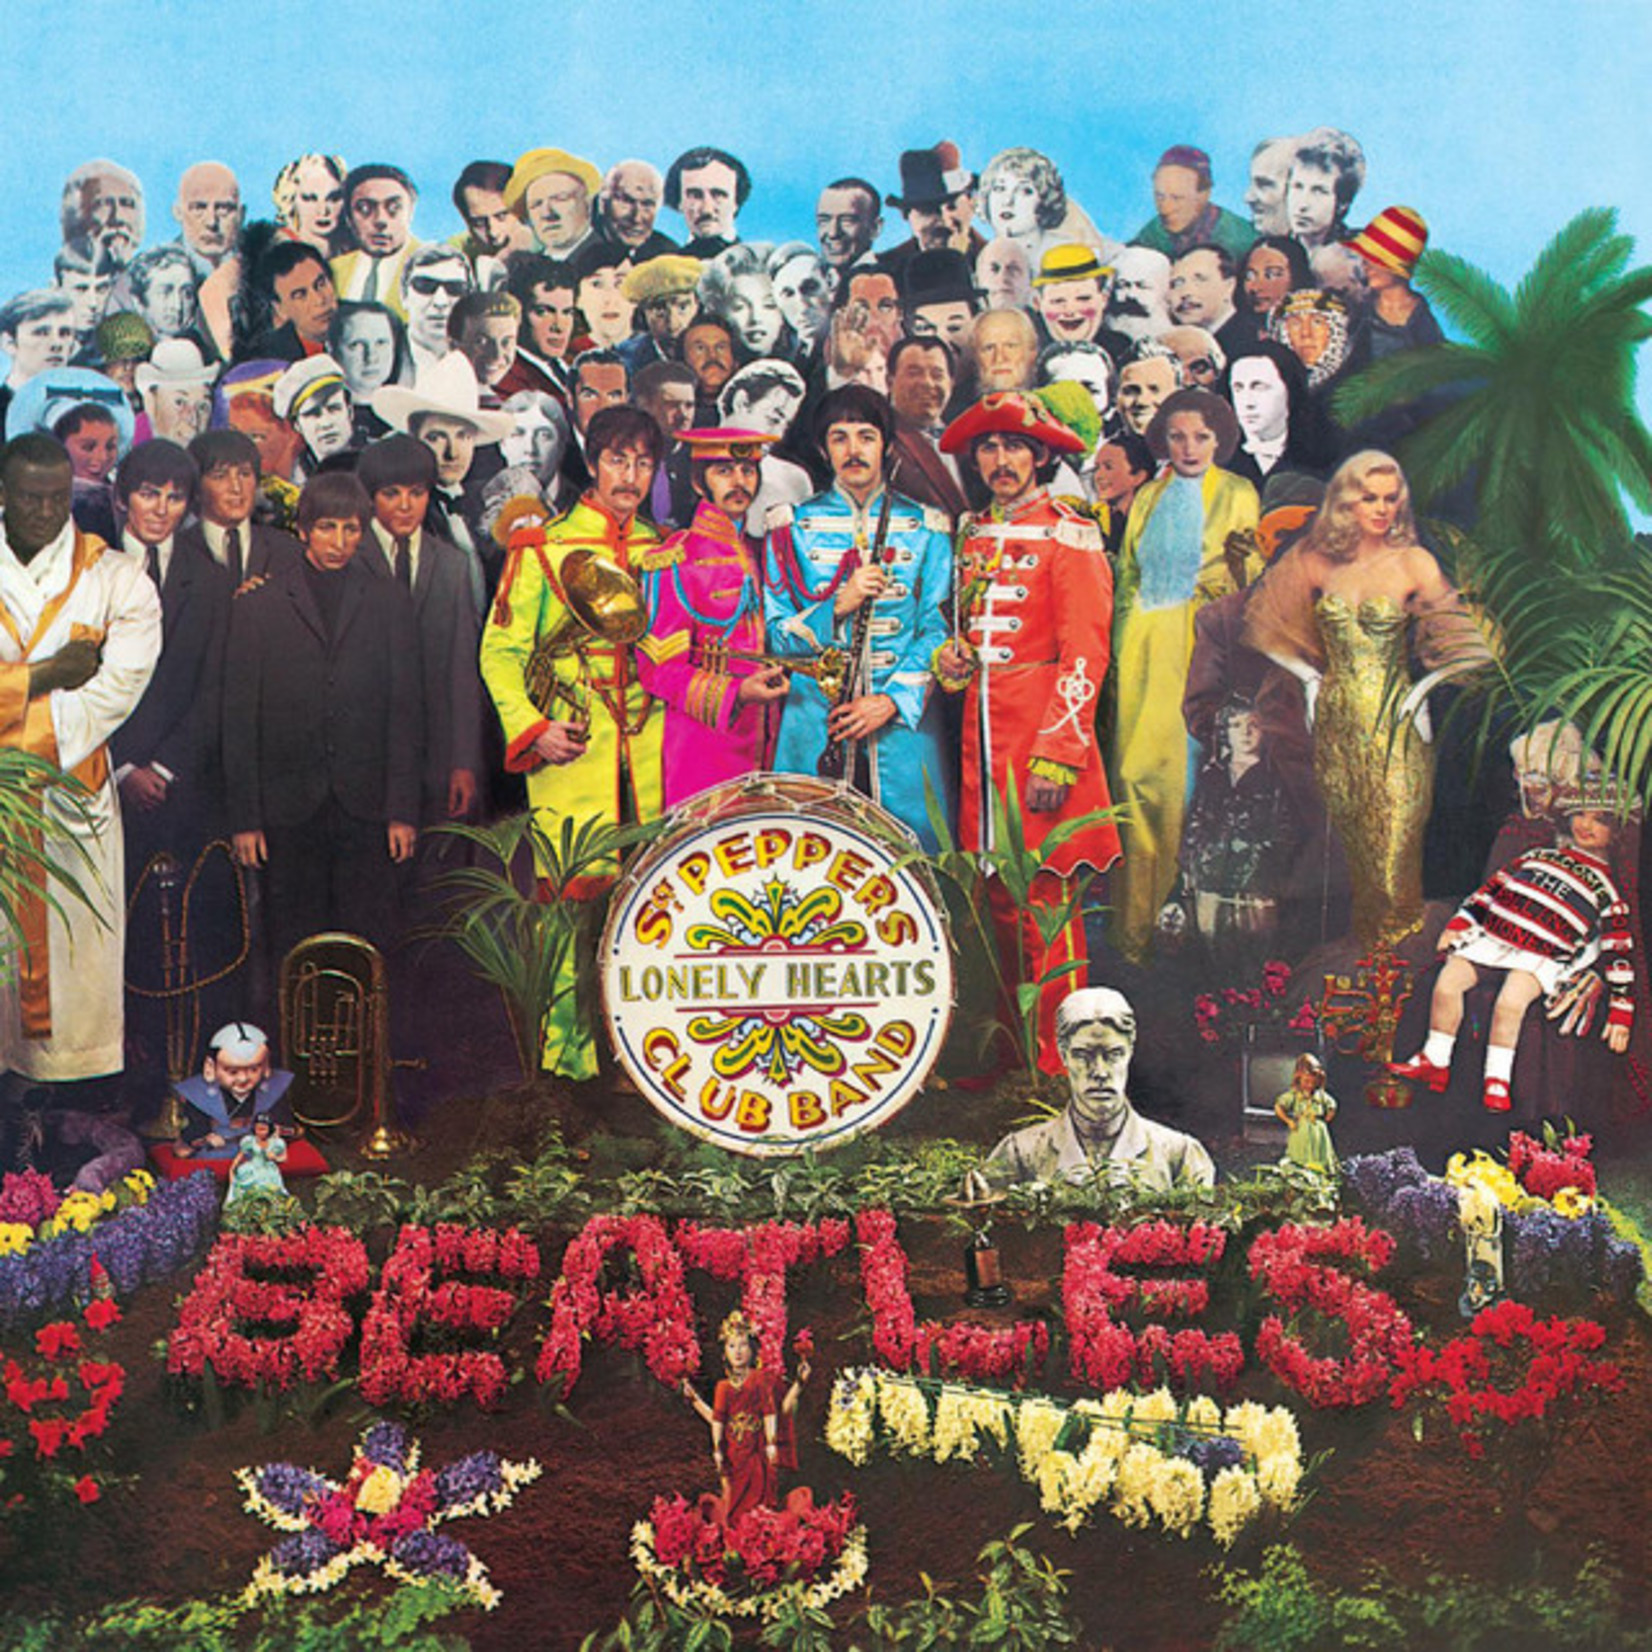 Vinyl The Beatles - Sgt. Peppers Lonely Hearts Club Band. - US Import